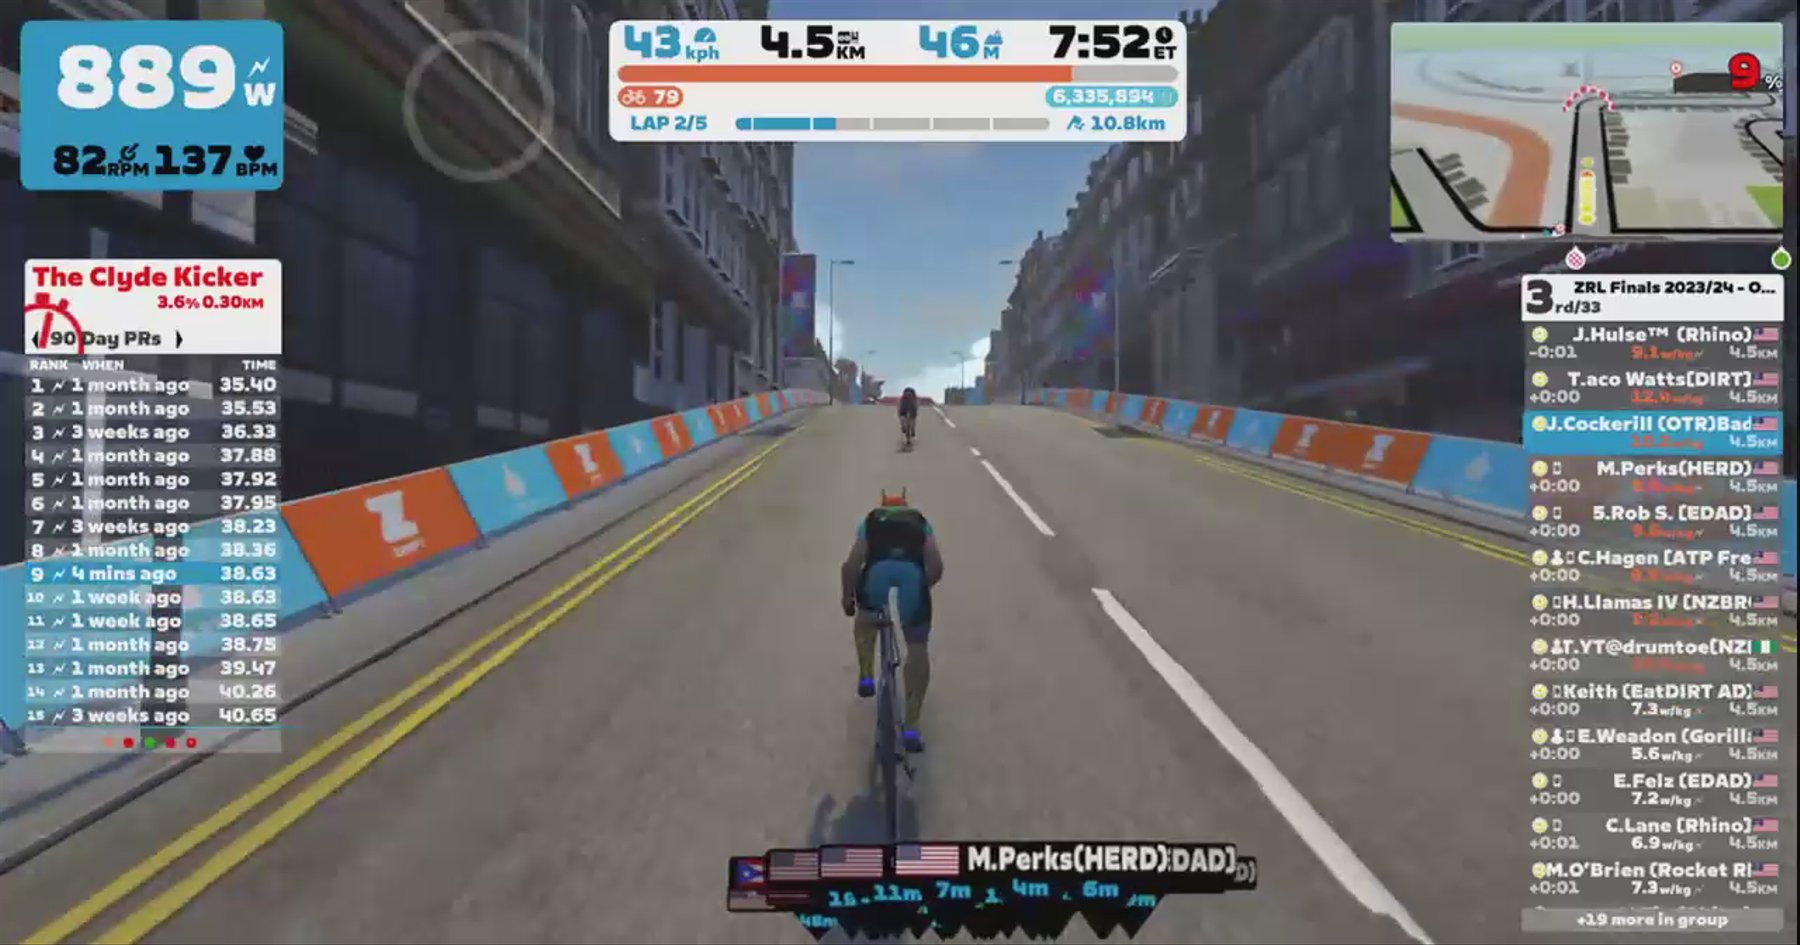 Zwift - Race: ZRL Finals 2023/24 - Open AMERICA Division 1 - Cup Final (Part1) (D) on Glasgow Crit Circuit in Scotland